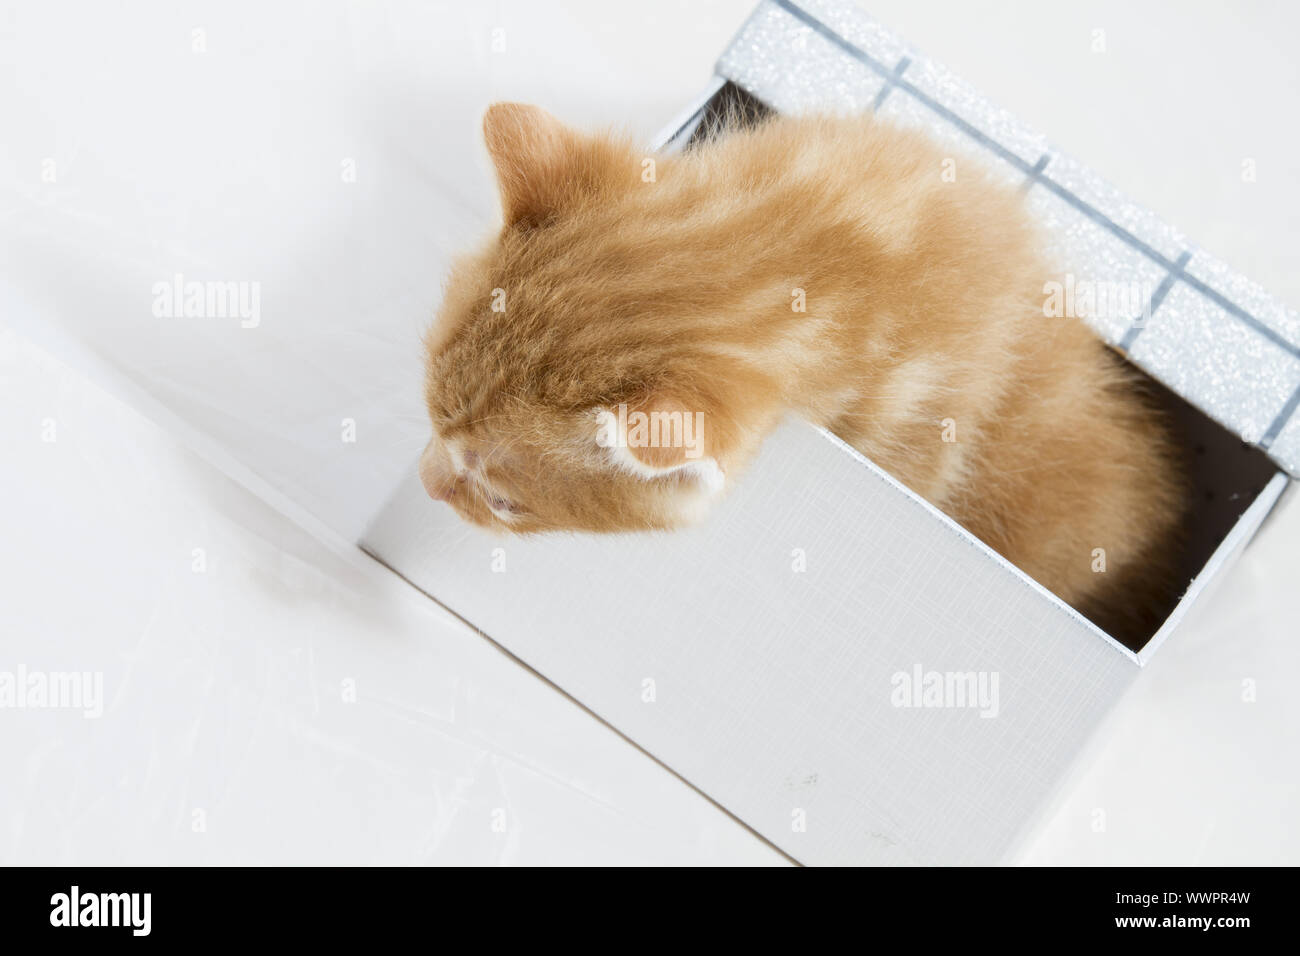 small kitten stuck in a gift box, cuddly animal sweet face Stock Photo